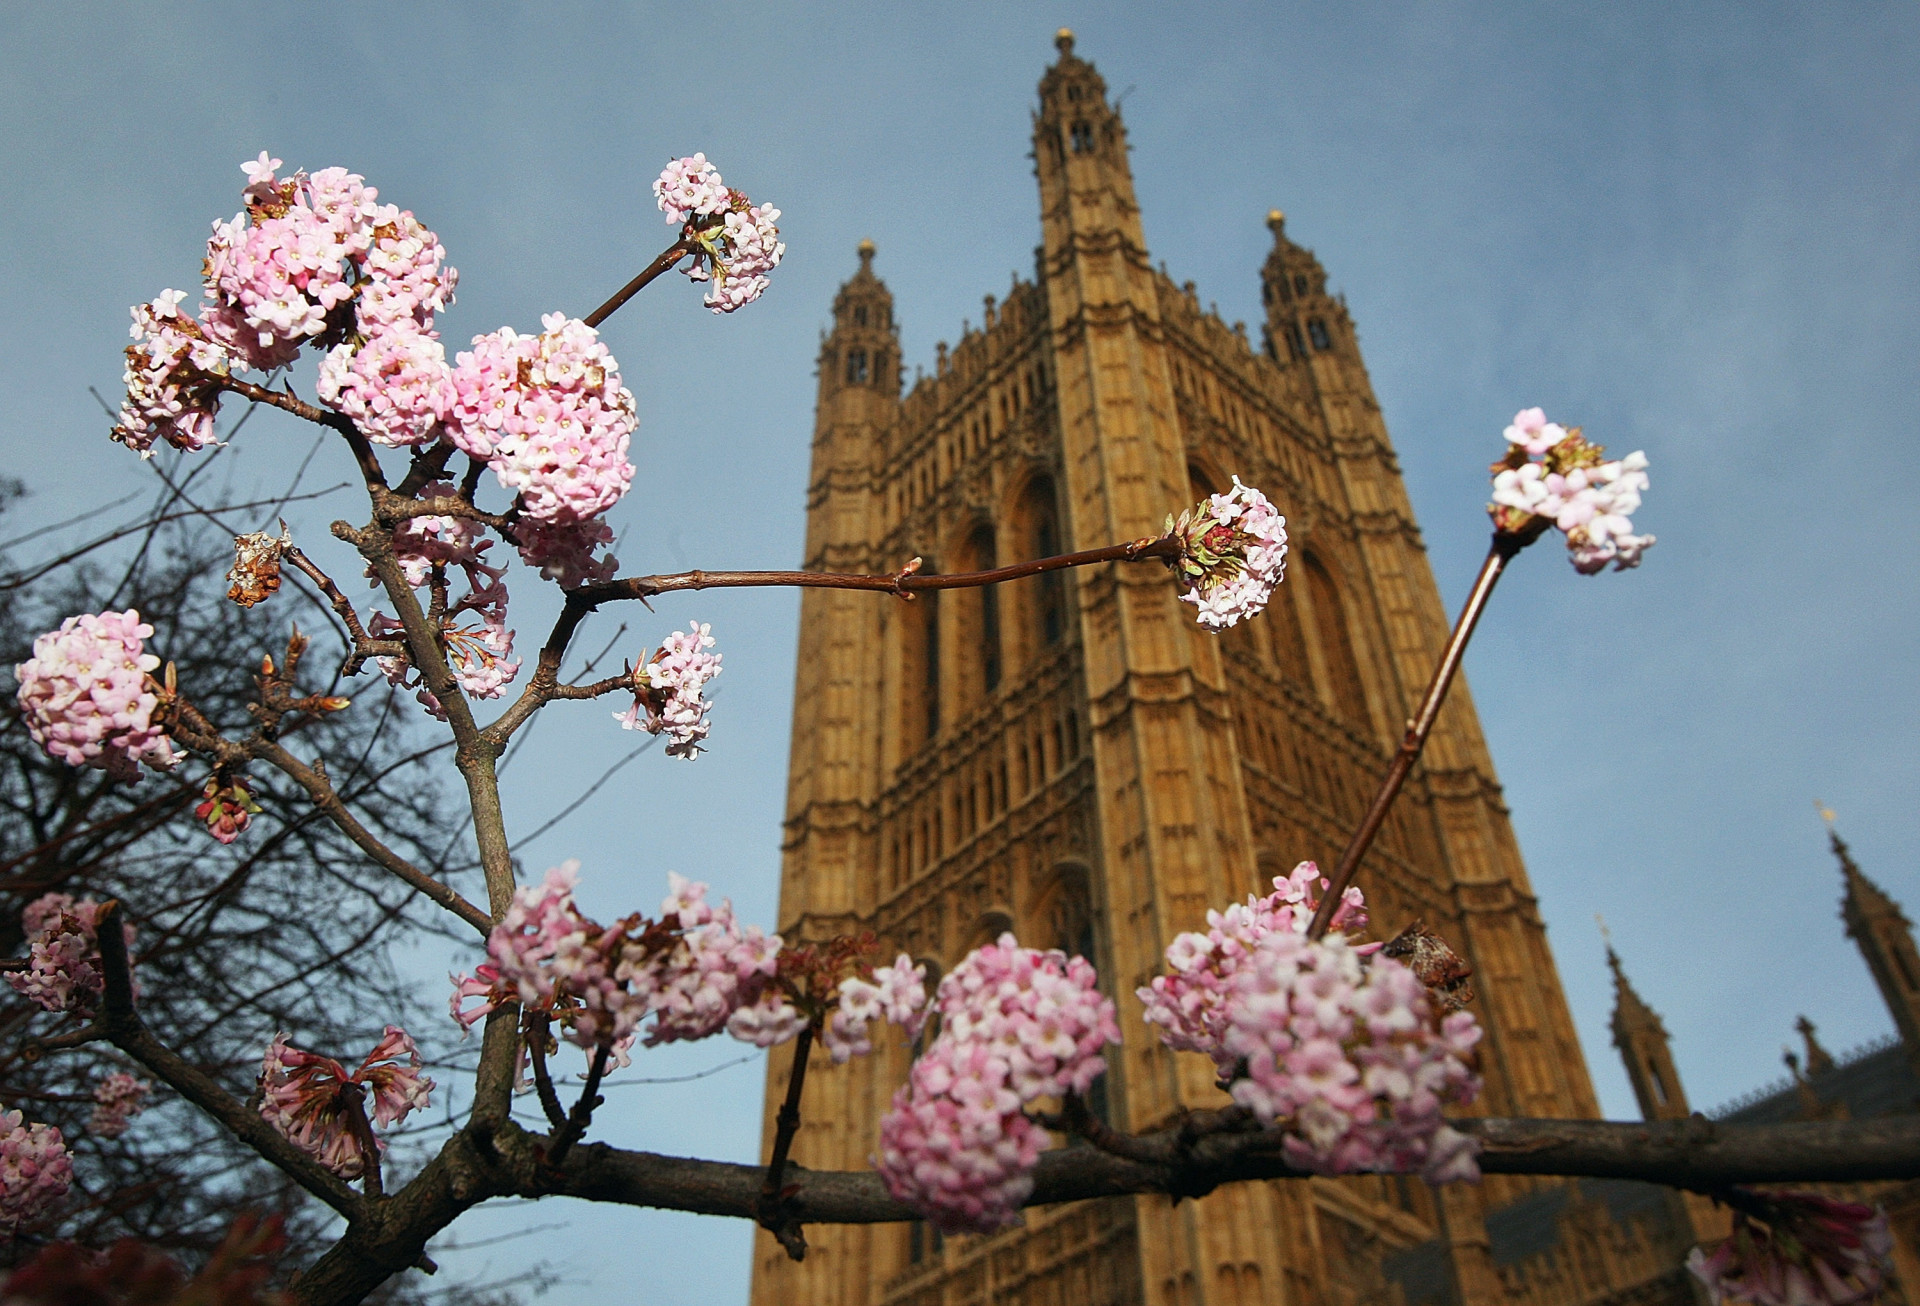 On the grounds in and around the Houses of Parliament lies an abundant display of Mount Fuji Blossoms, Weeping Cherries, and Camellias among other trees and shrubs.